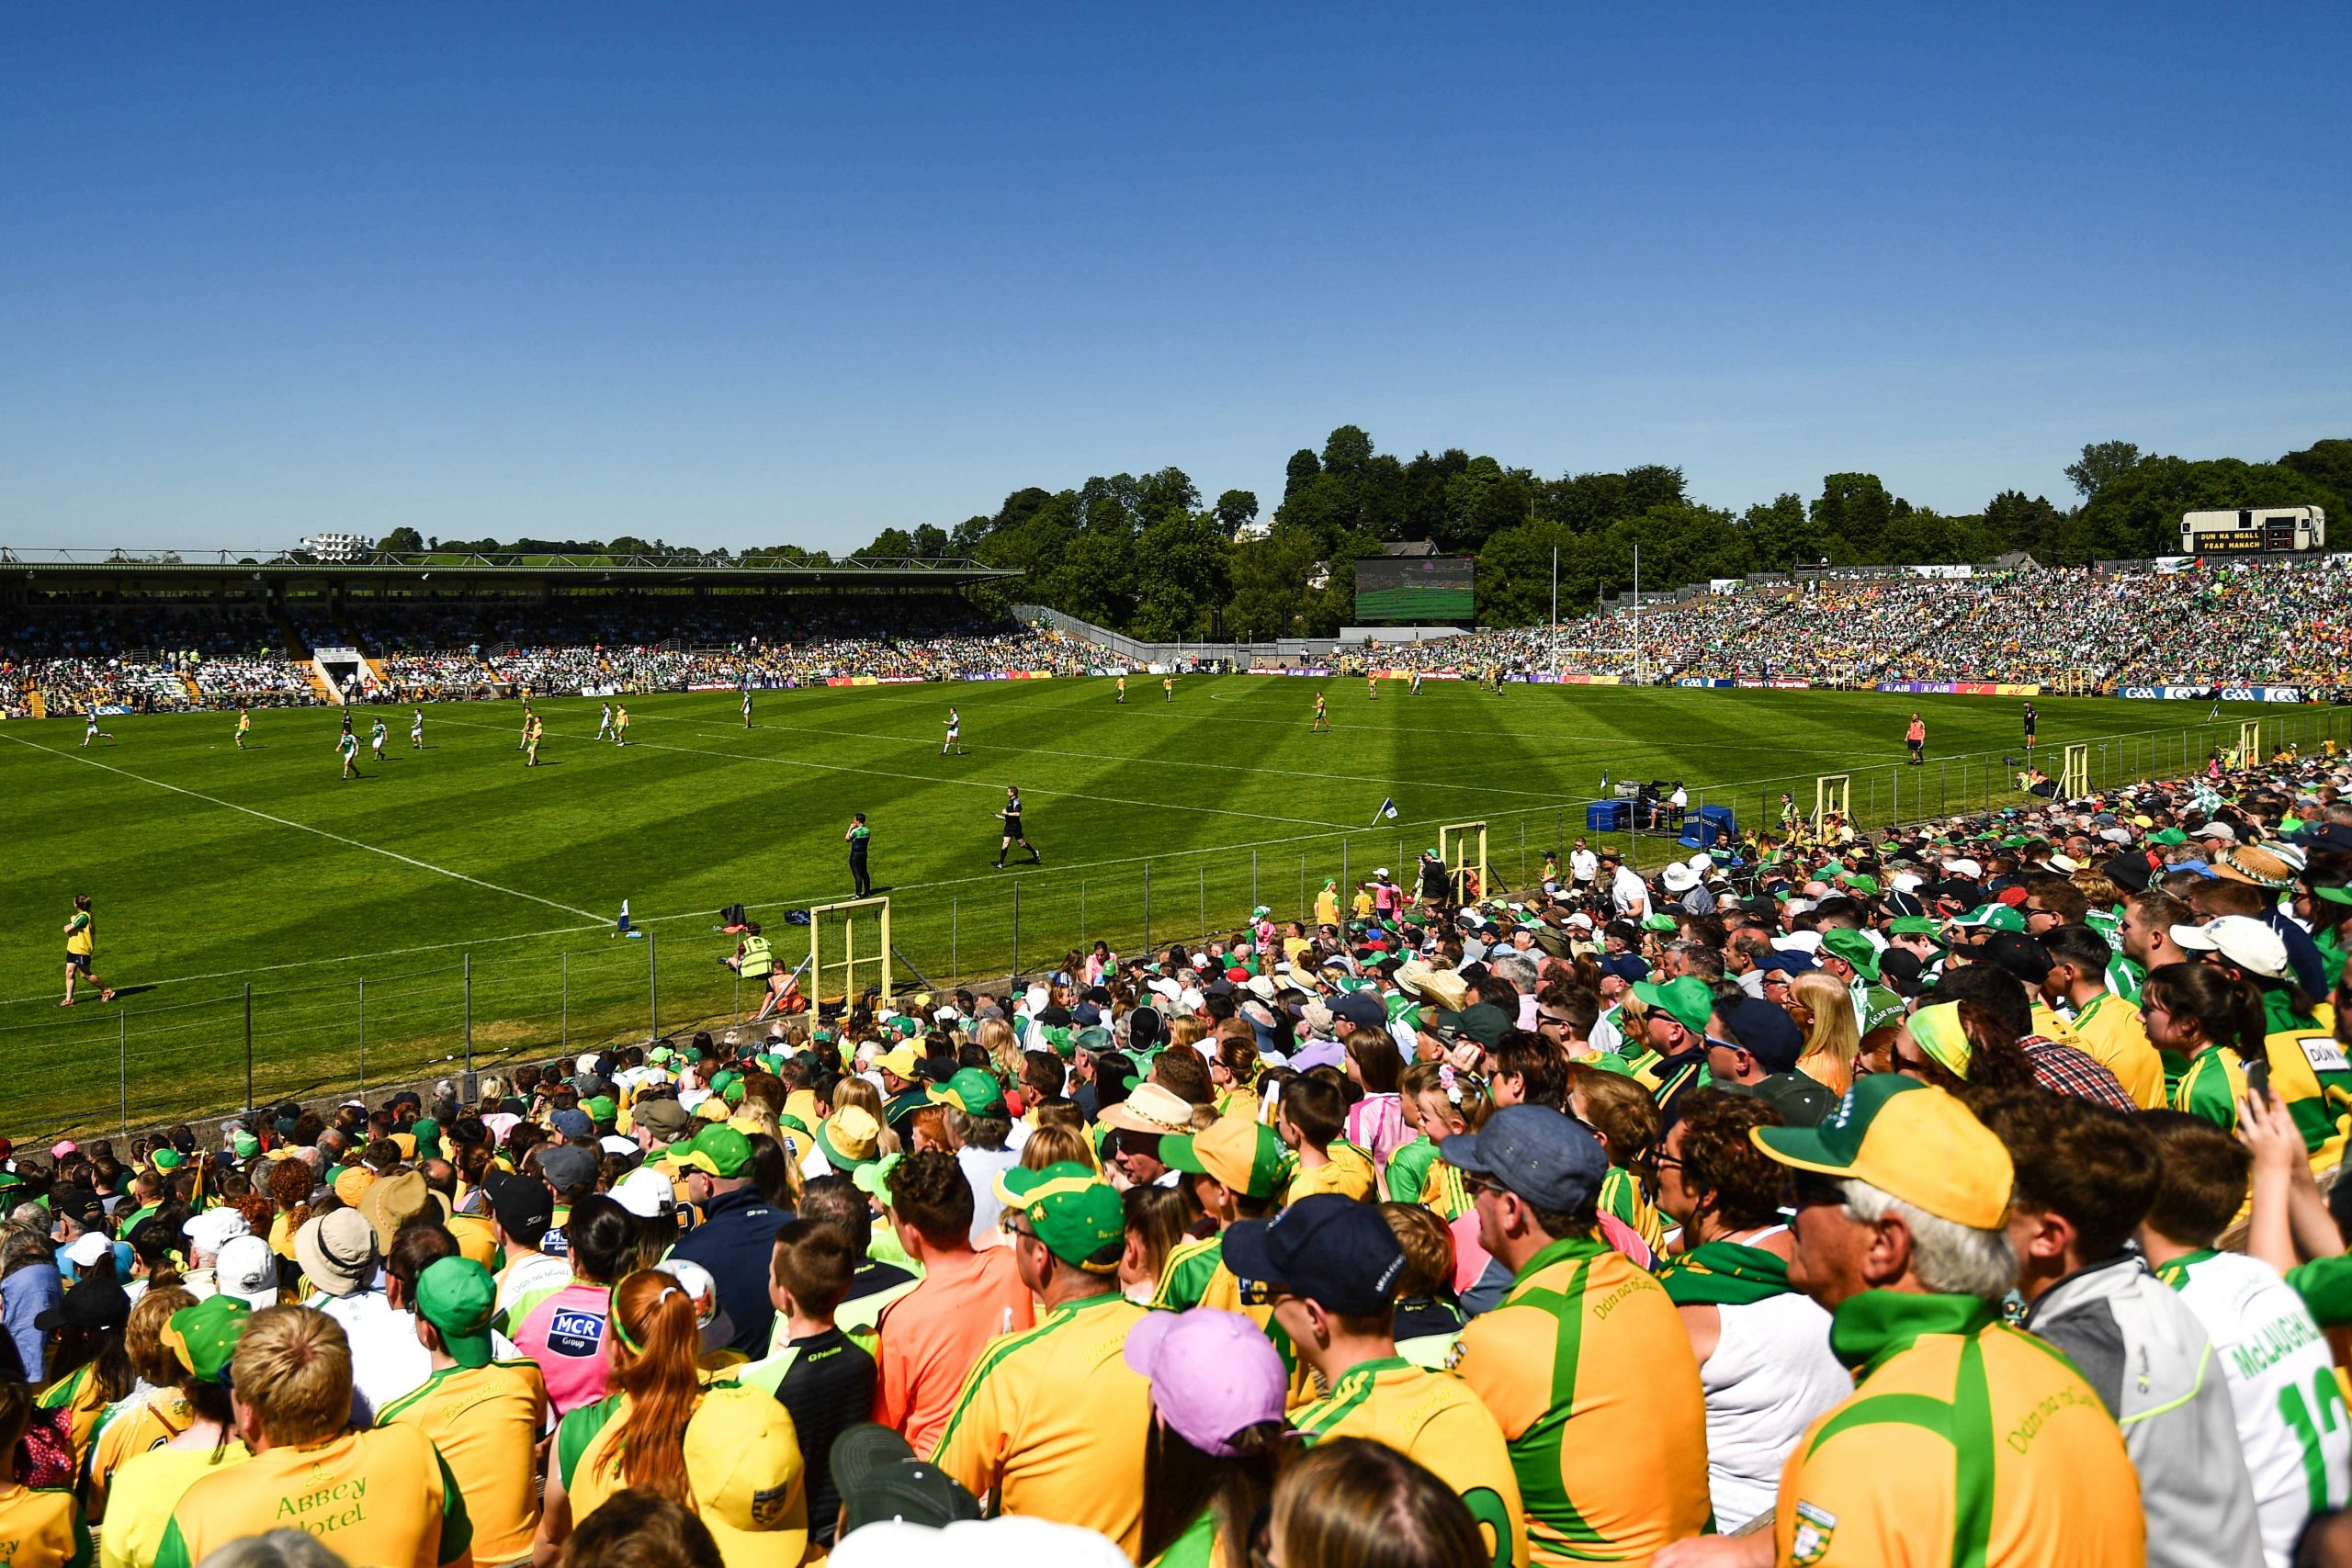 Ulster Championship Ticket Price Reductions and Packages announced